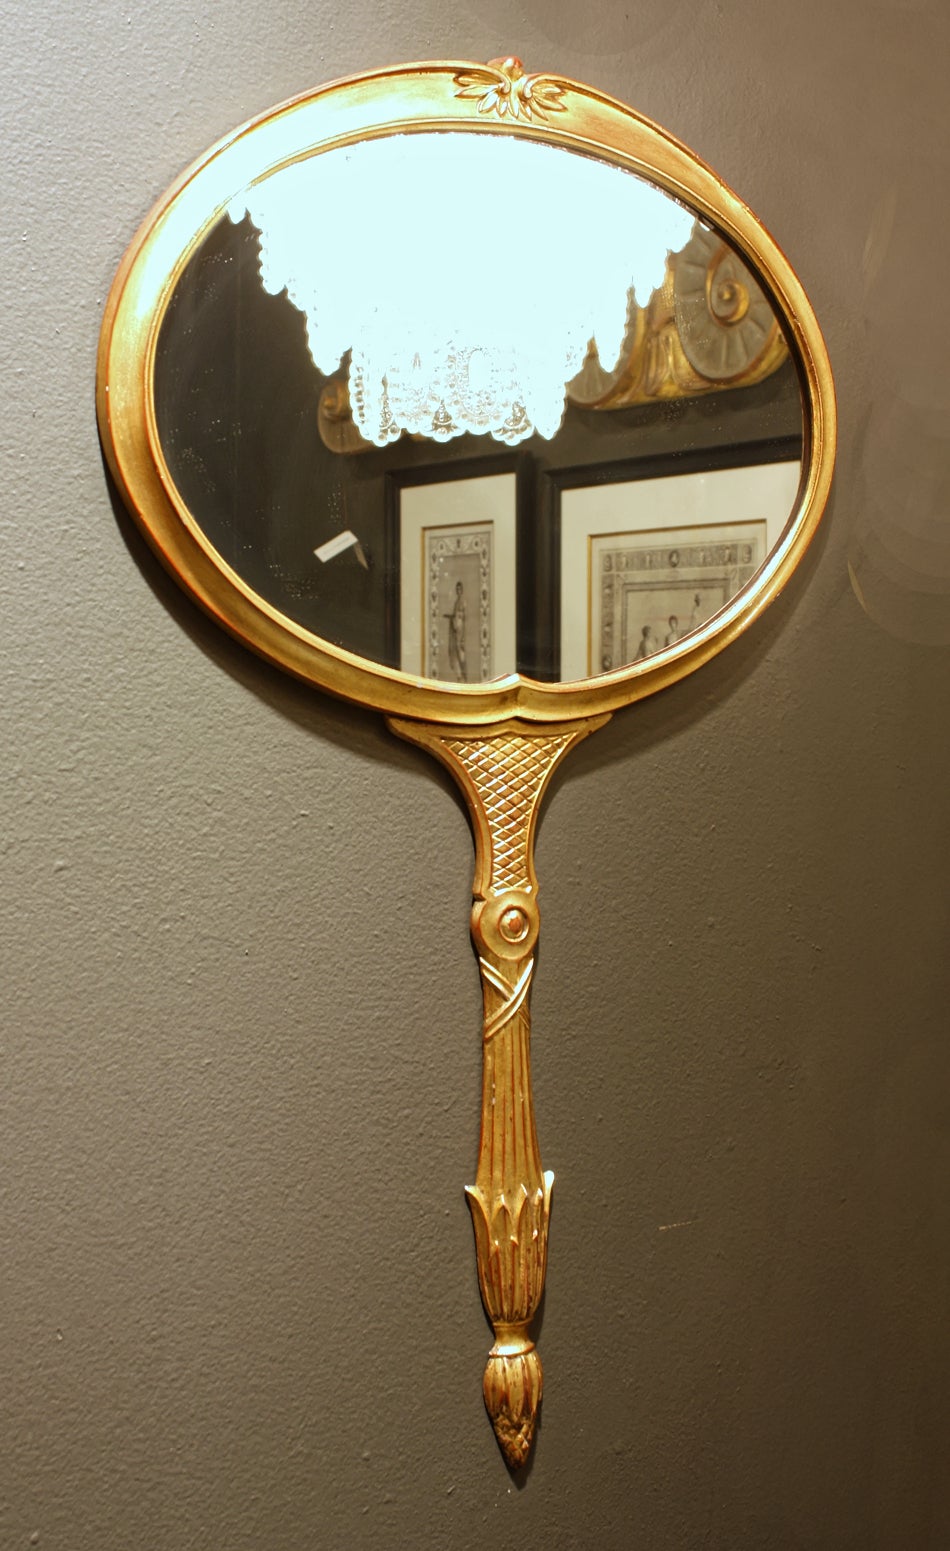 Pair of wall mirrors by Palladio in the style of Fornasetti, circa 1960. Cast metal with gilt finish in the shape of a hand mirror. Individual mirror available for $1,600.